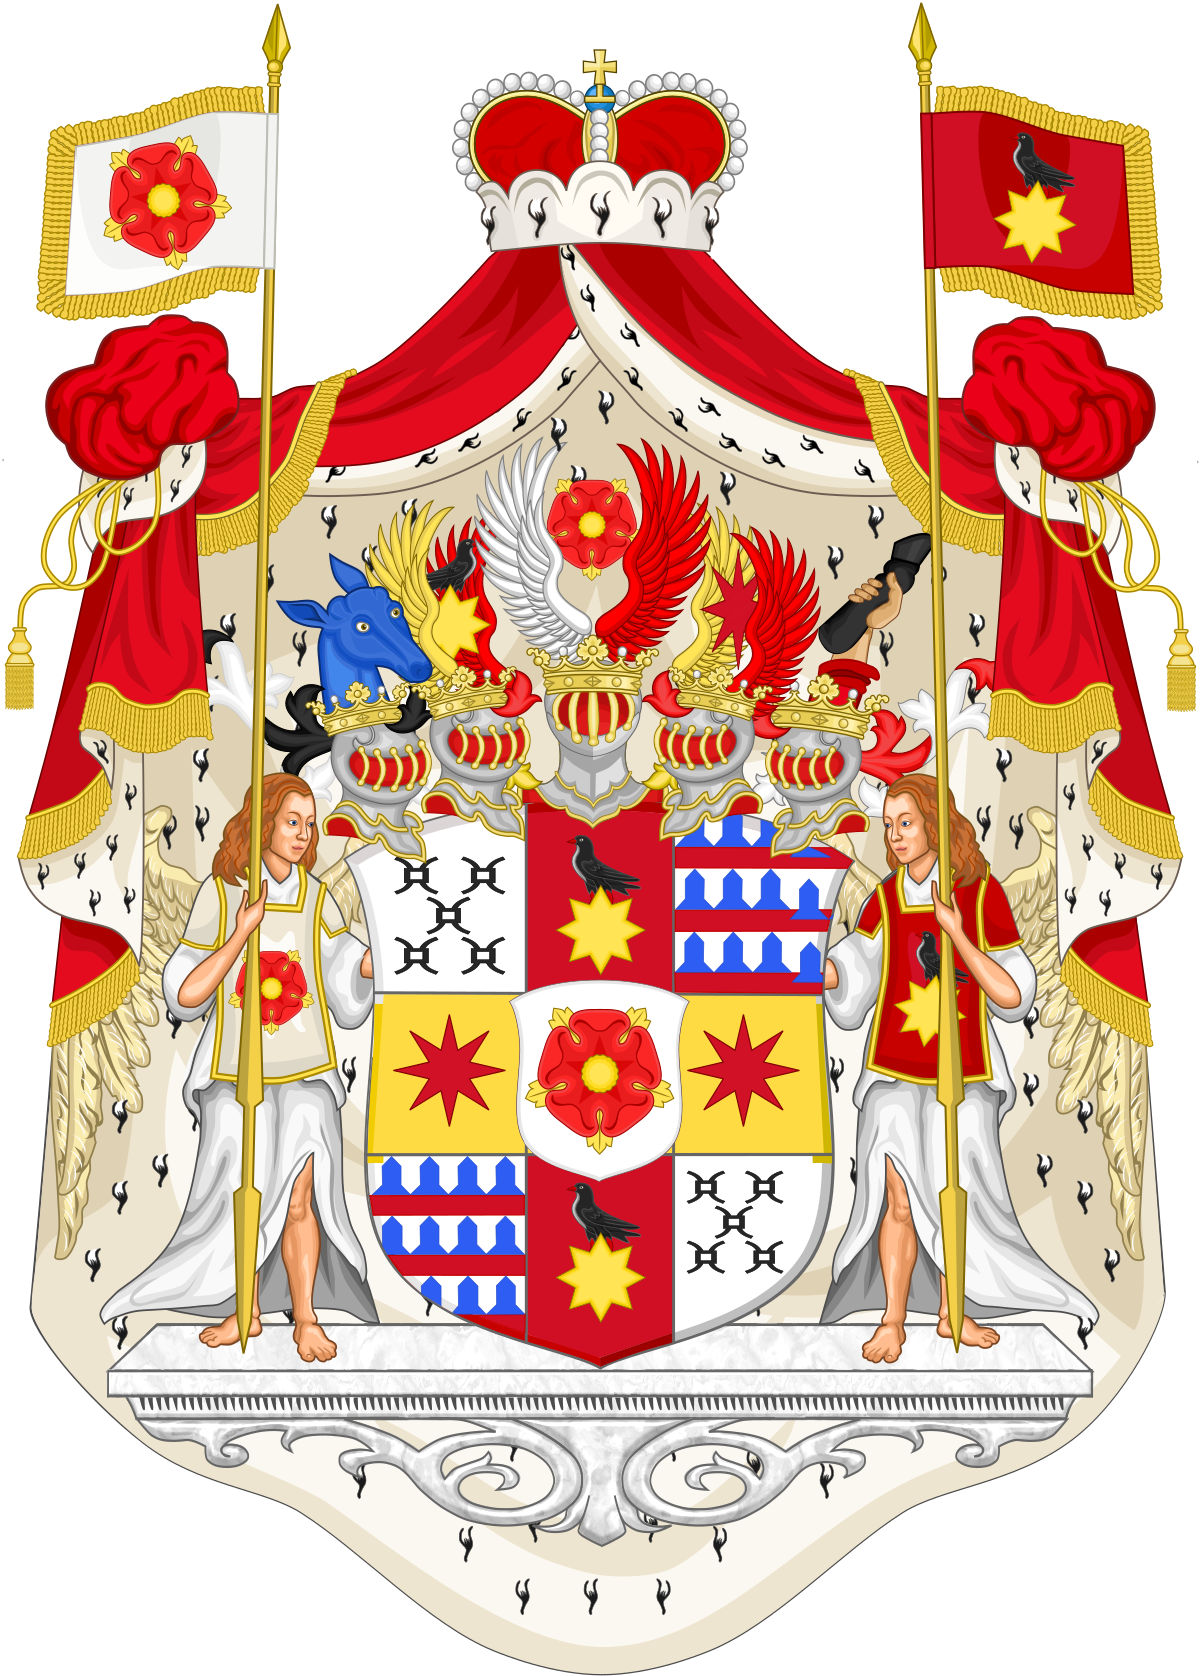 A Coat Of Arms With A Flag And Flags